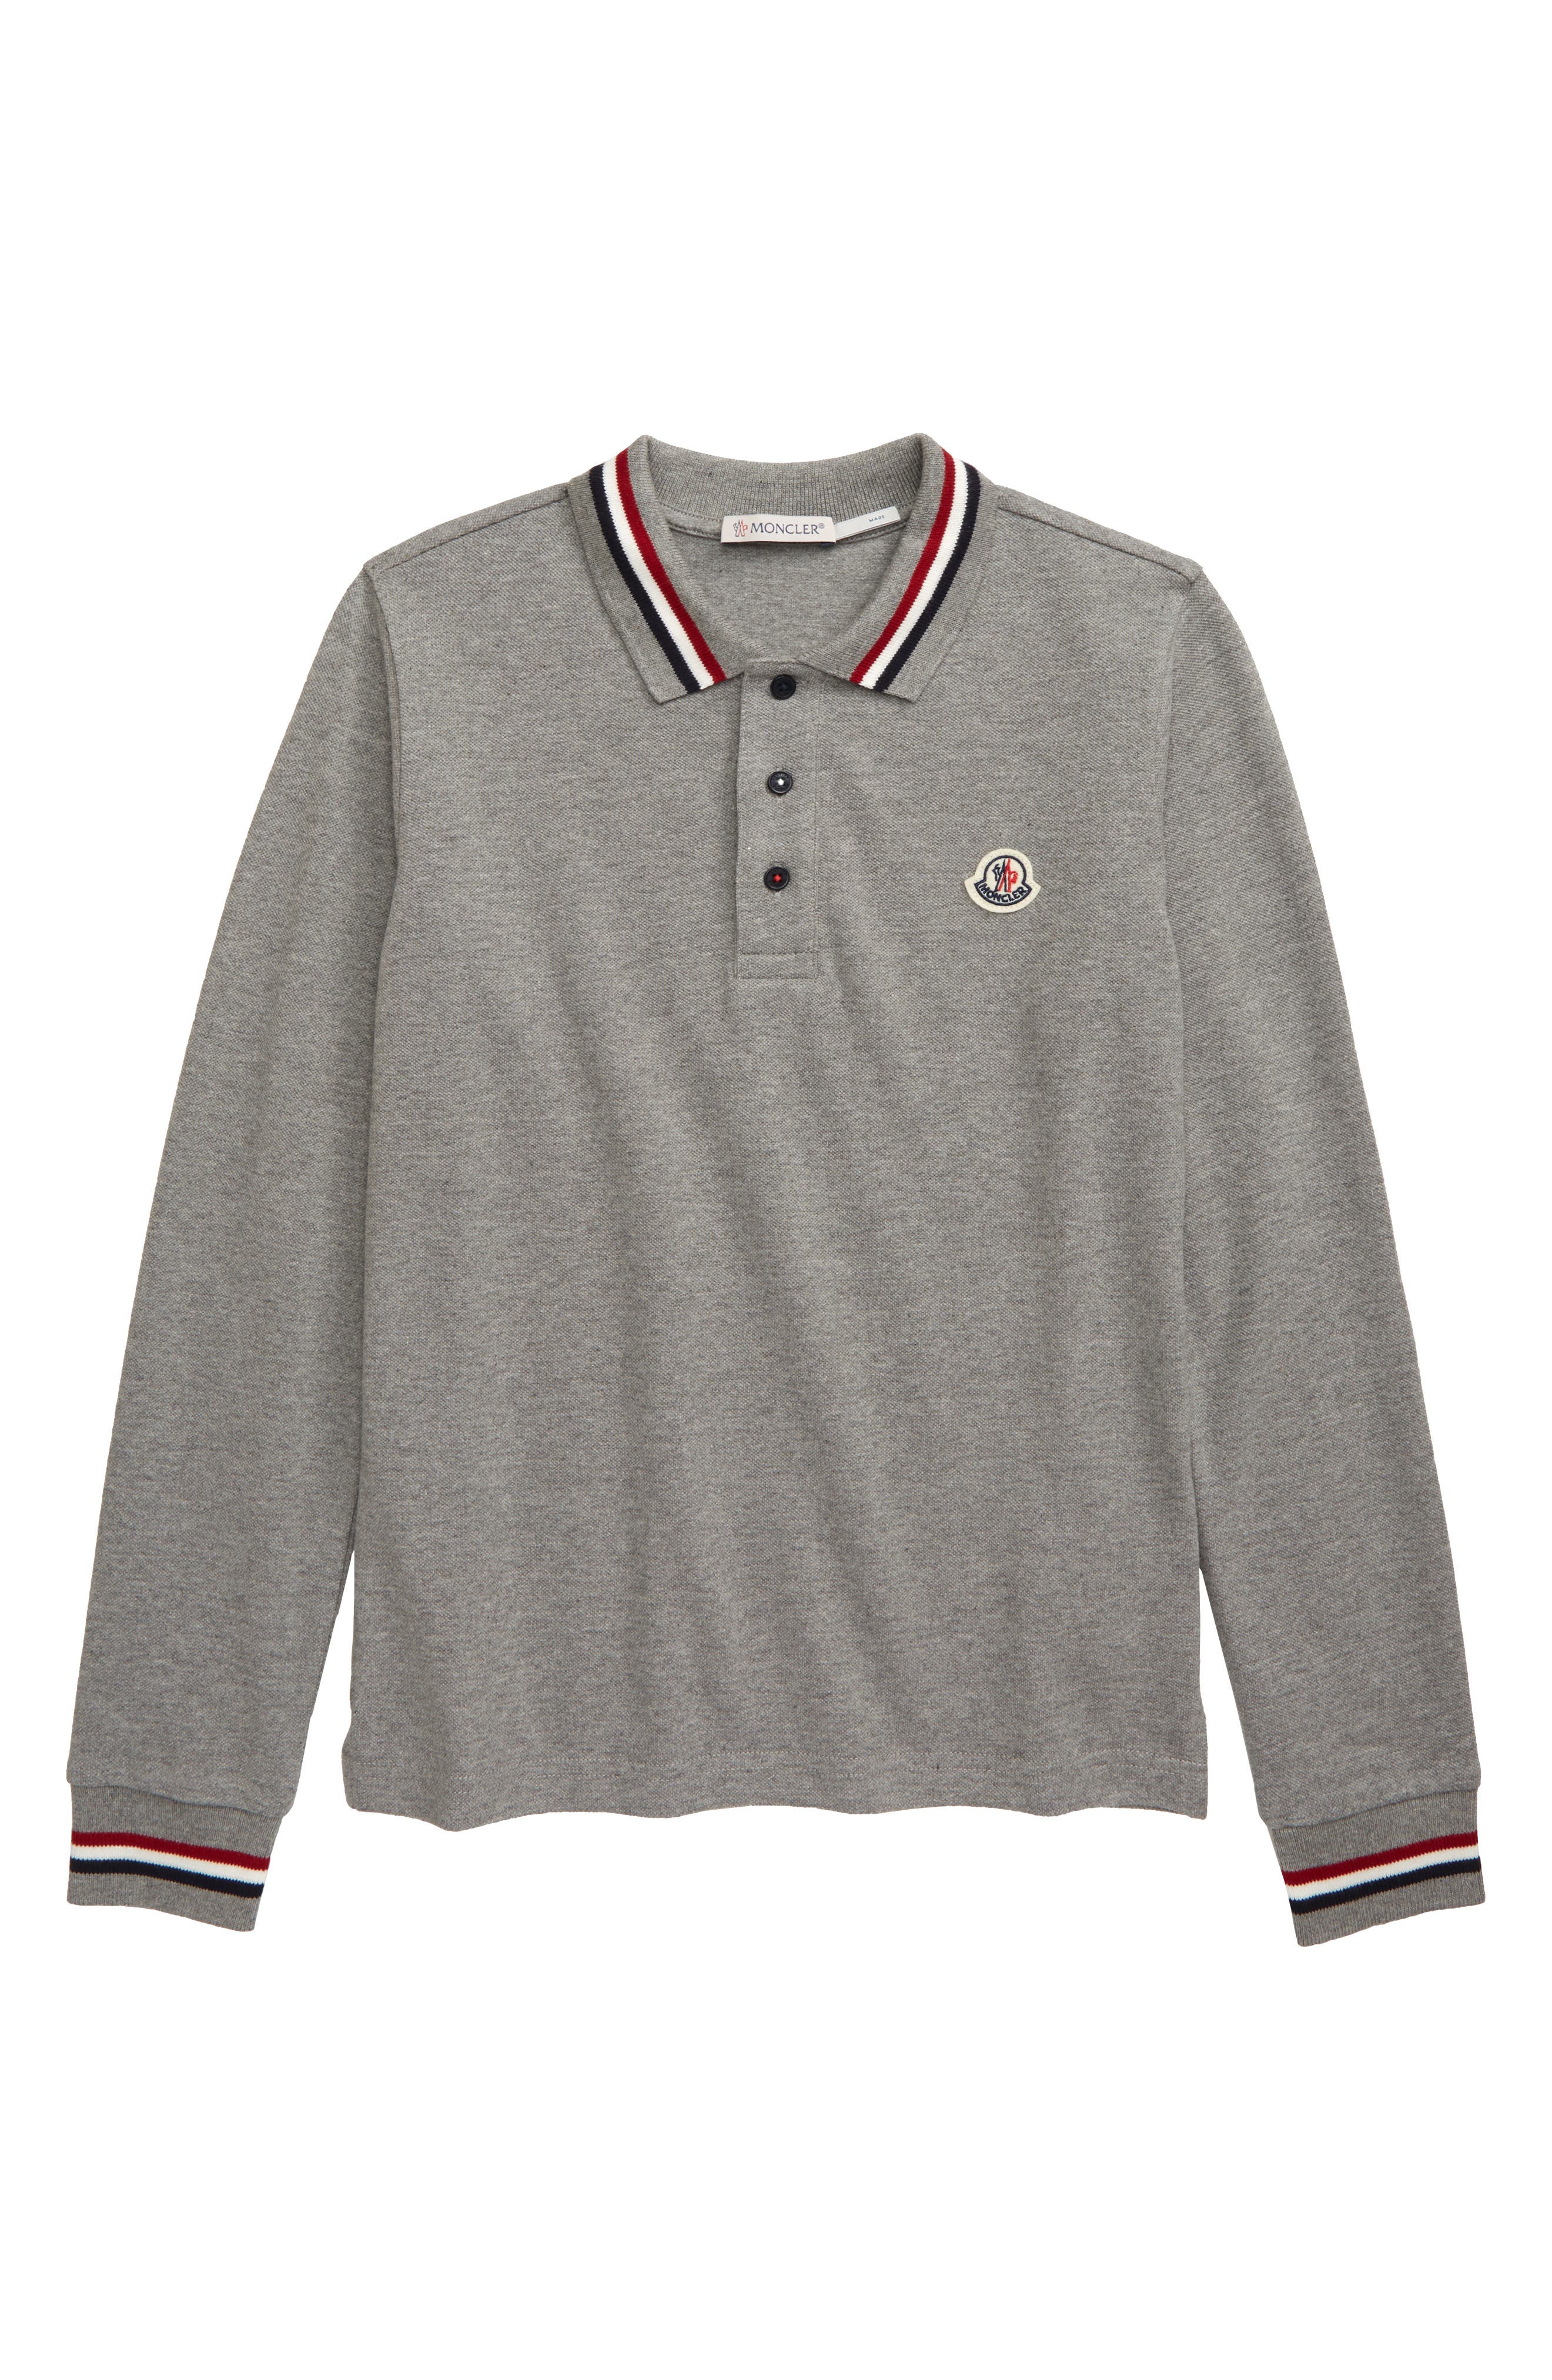 moncler shirts for toddlers